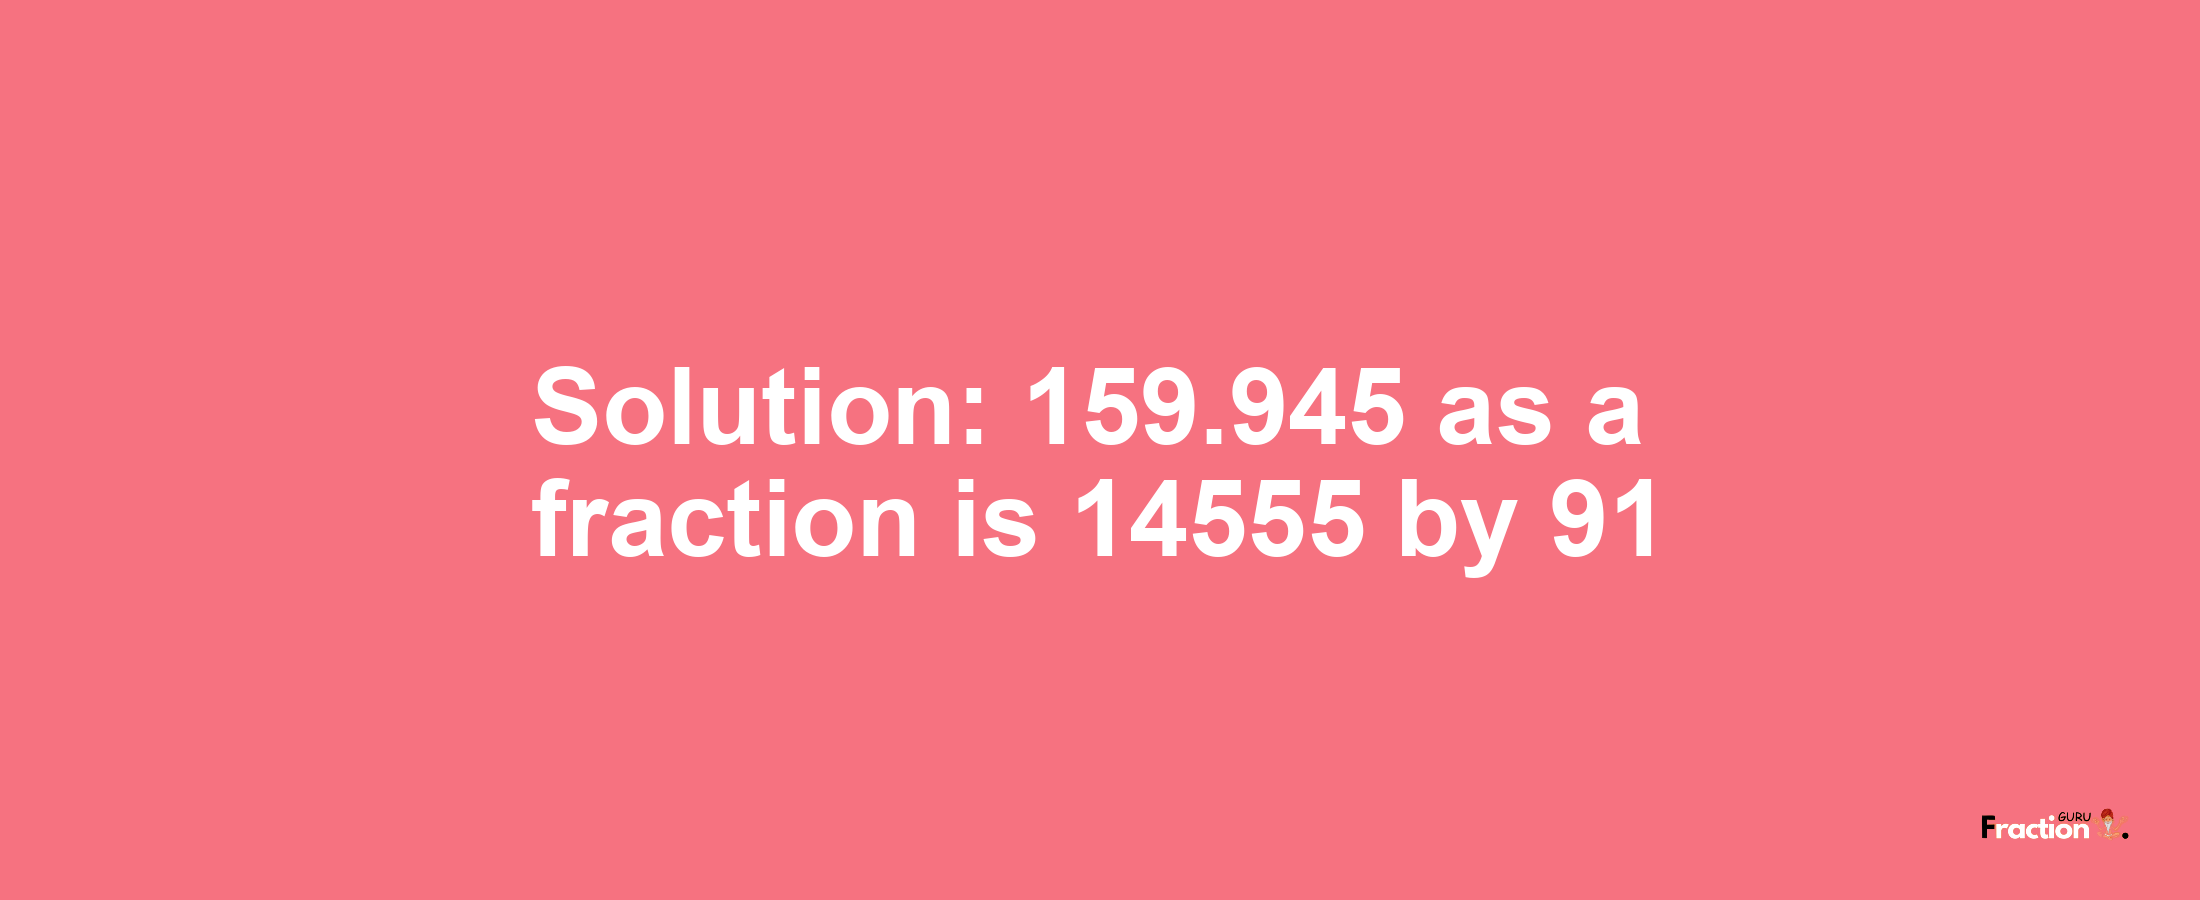 Solution:159.945 as a fraction is 14555/91